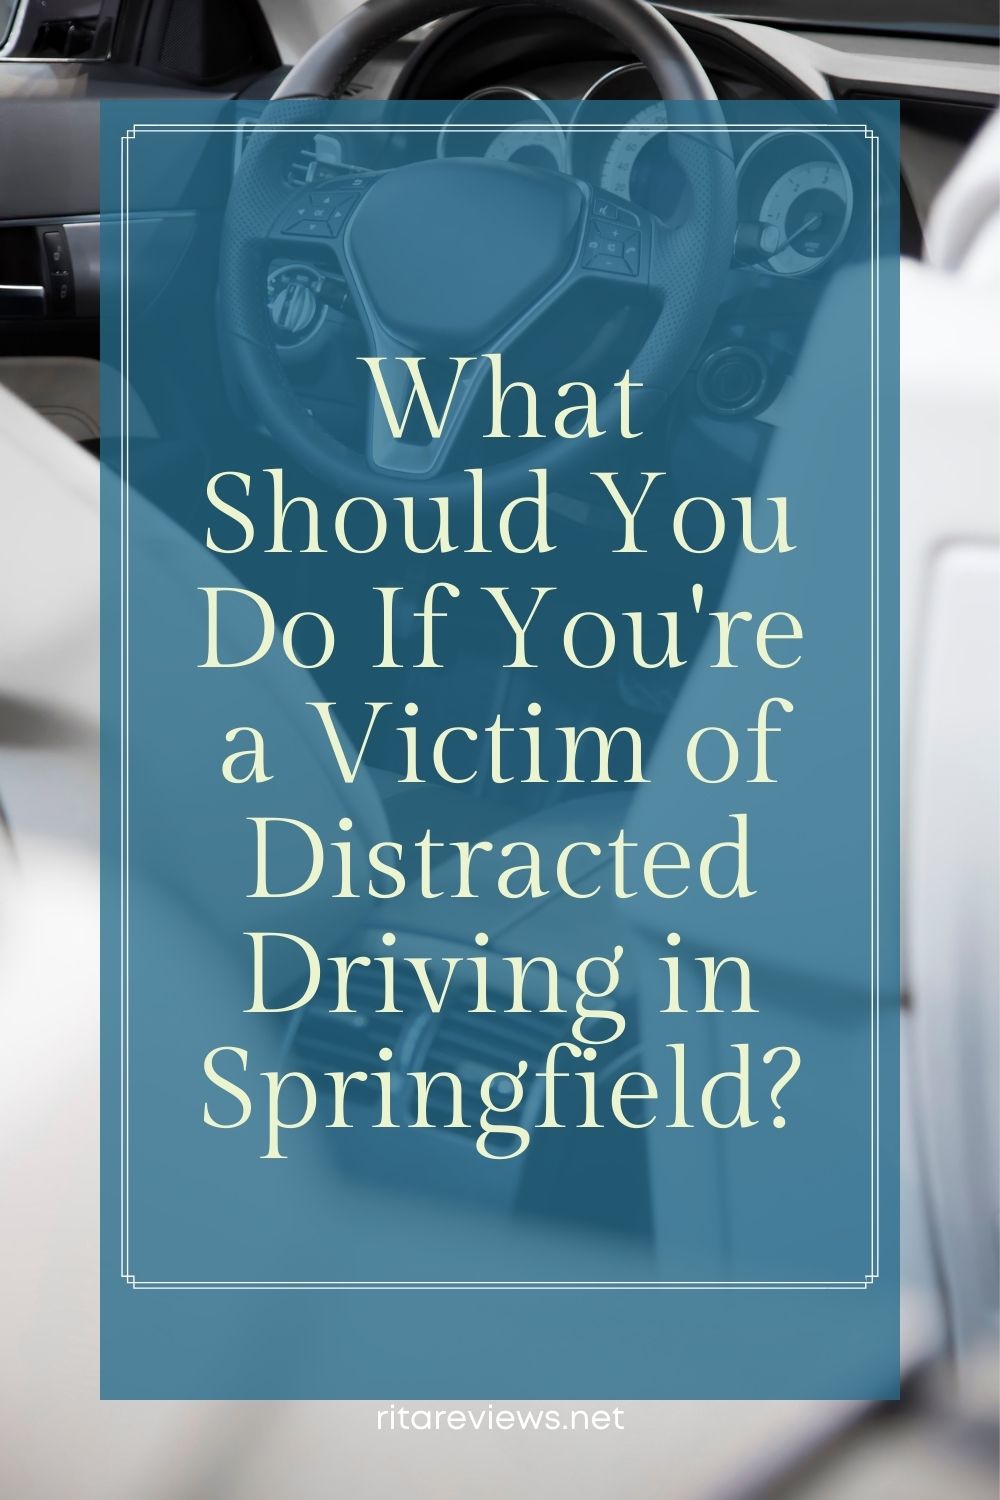 What Should You Do If You're a Victim of Distracted Driving in Springfield